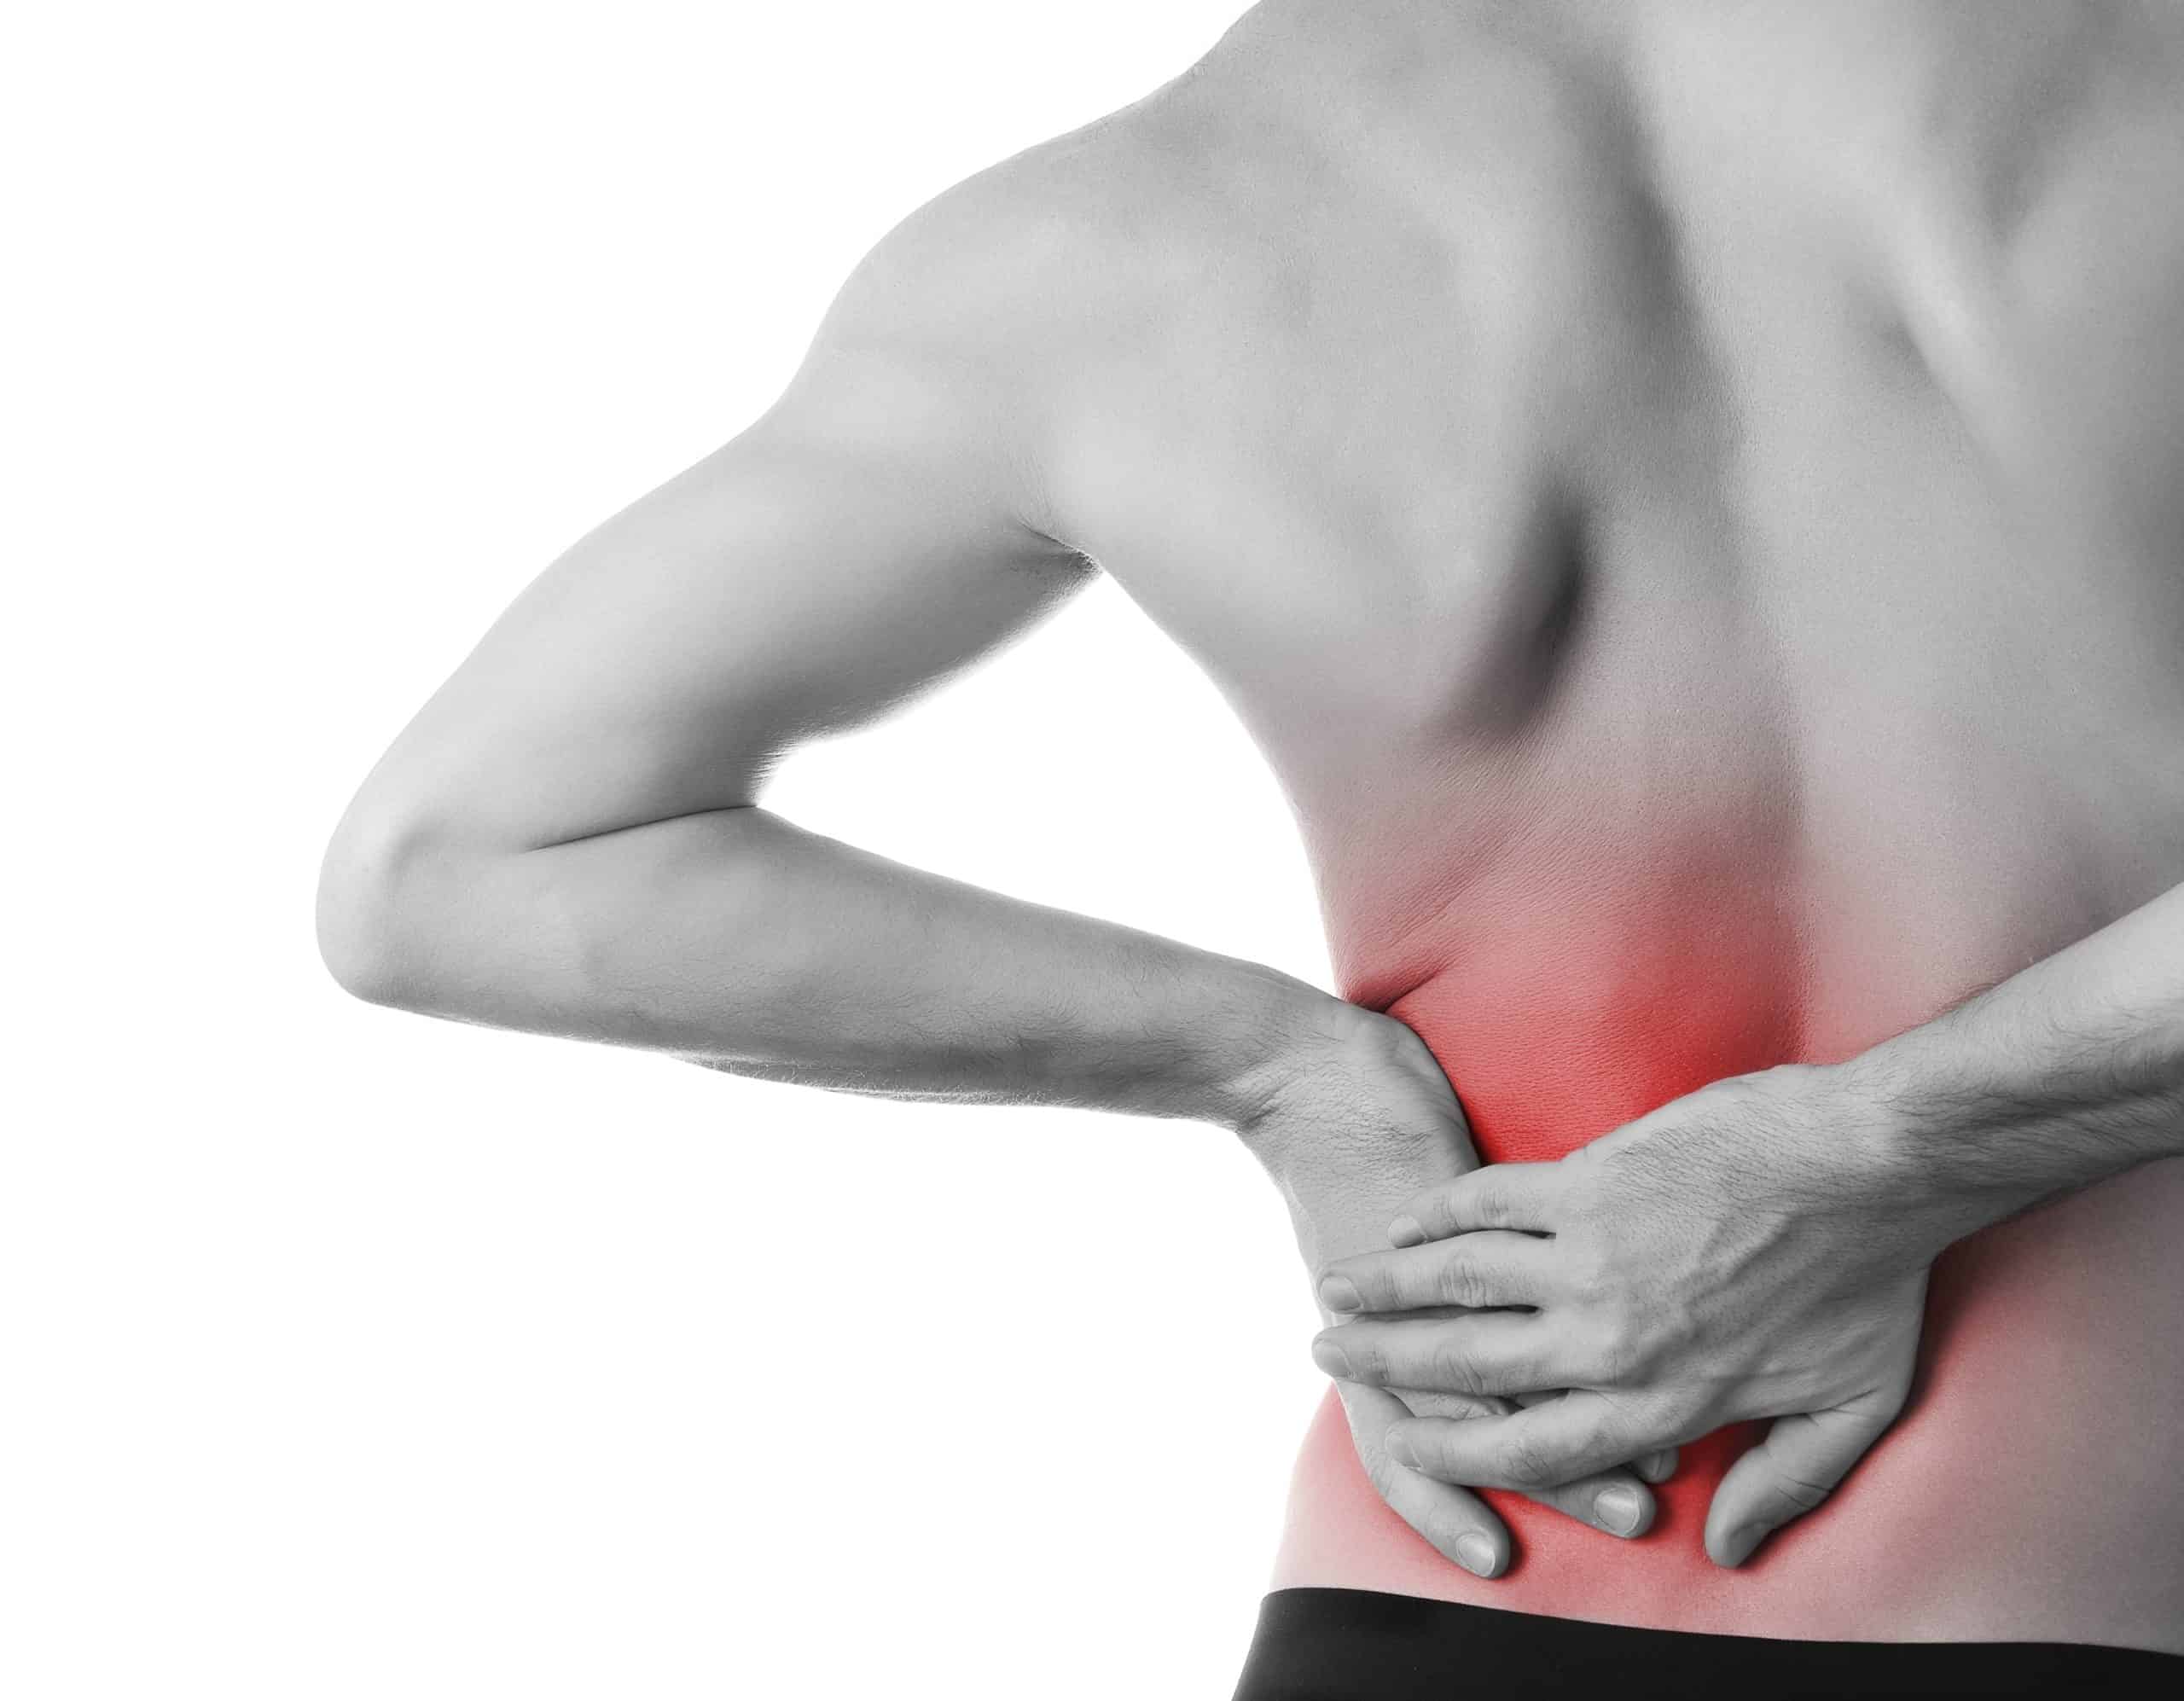 Massage for back-pain relief